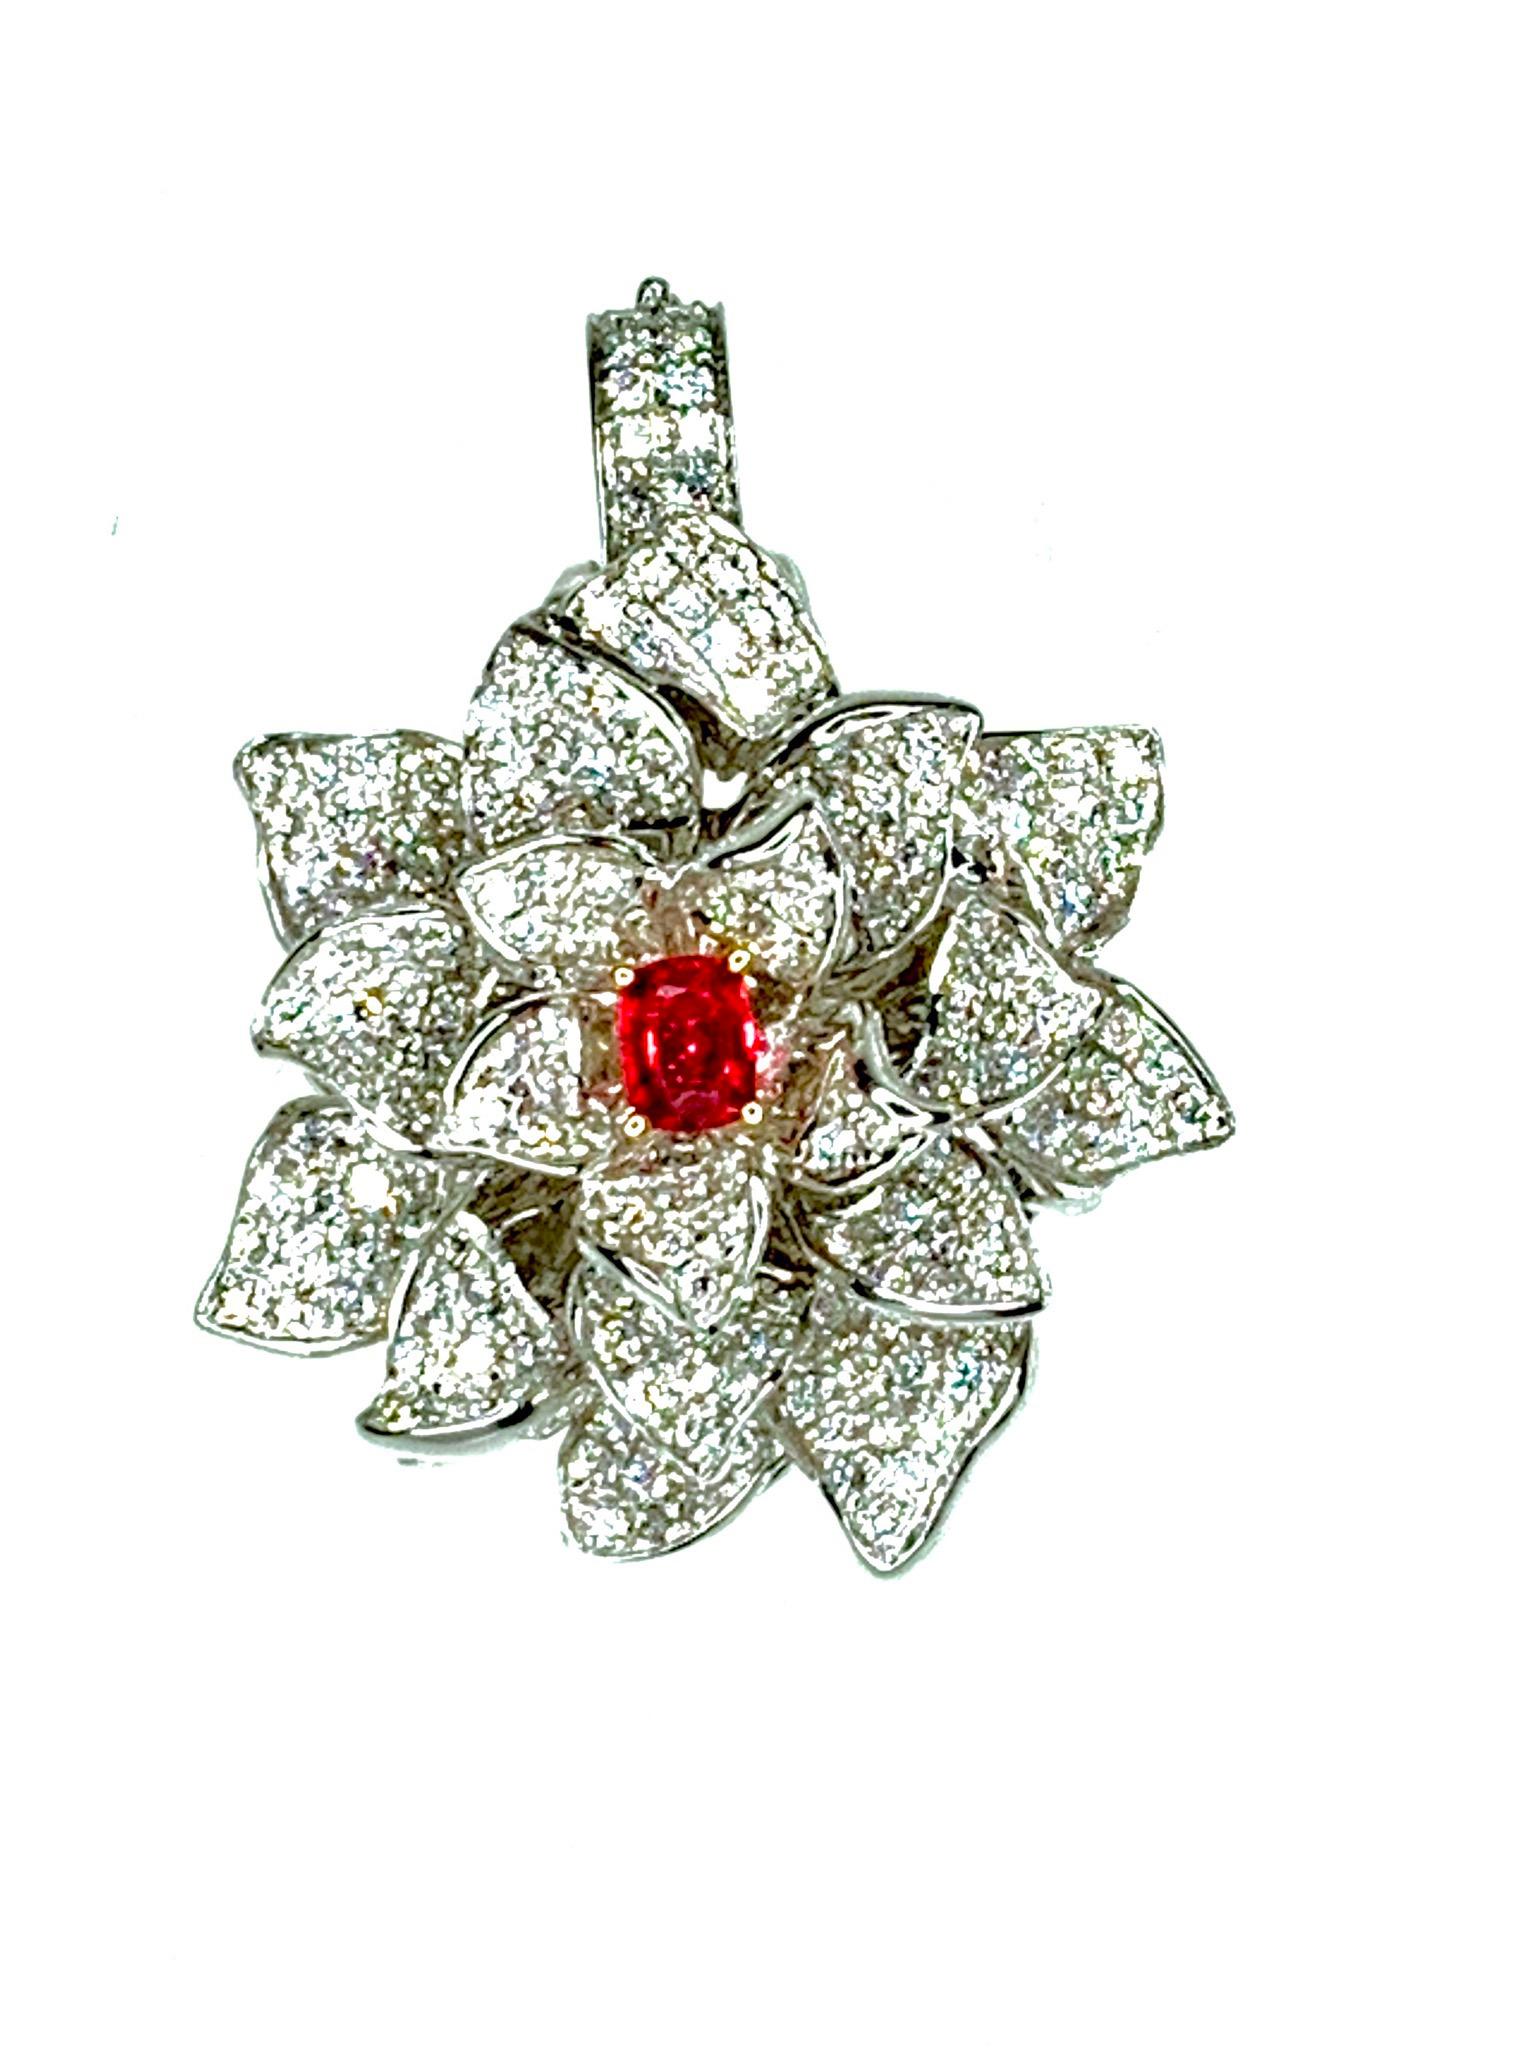 GEMOLITHOS Spinel and Diamond Ring-Pendant, Modern In Excellent Condition For Sale In Munich, DE